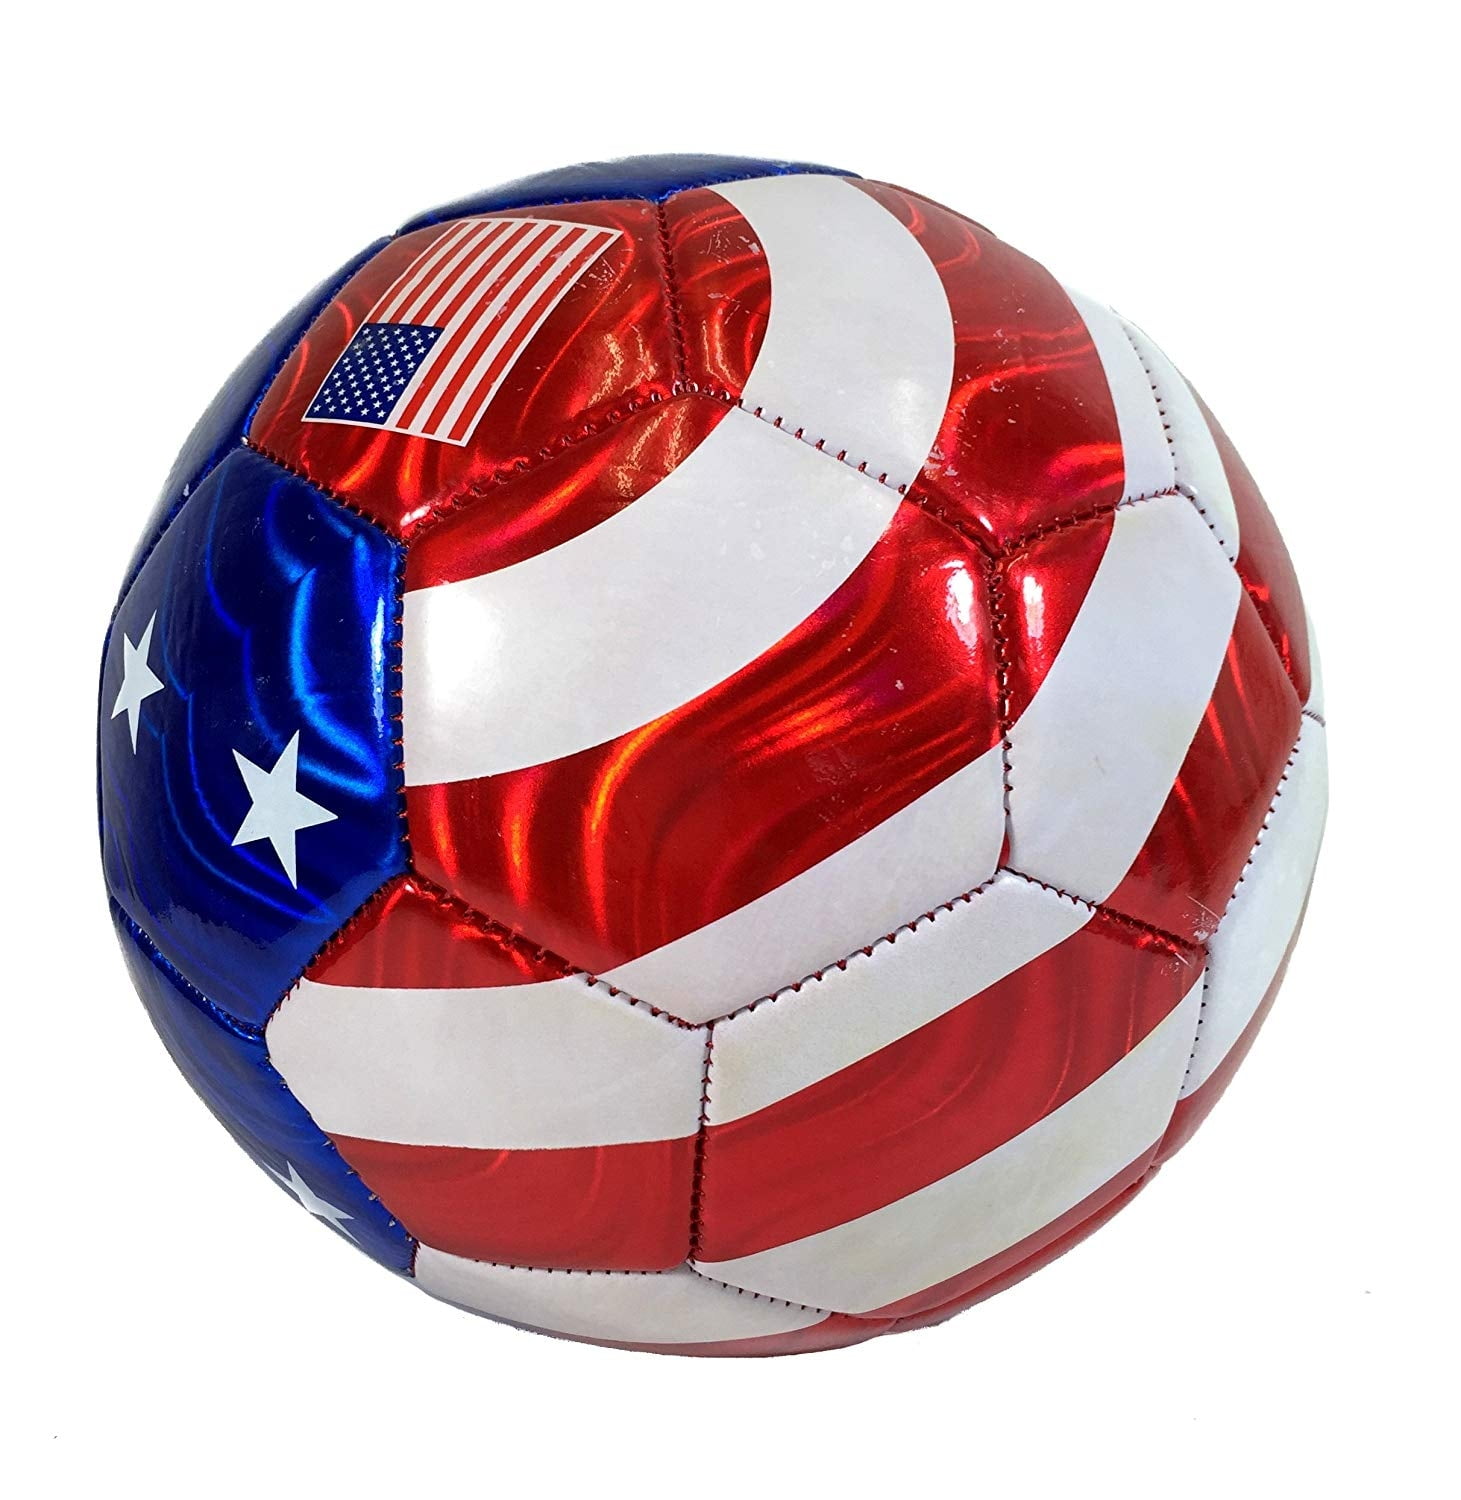 Details about   Brine Soccer Match Ball Bag Carry 4 Balls In Comfort Sports Accessory For Games 